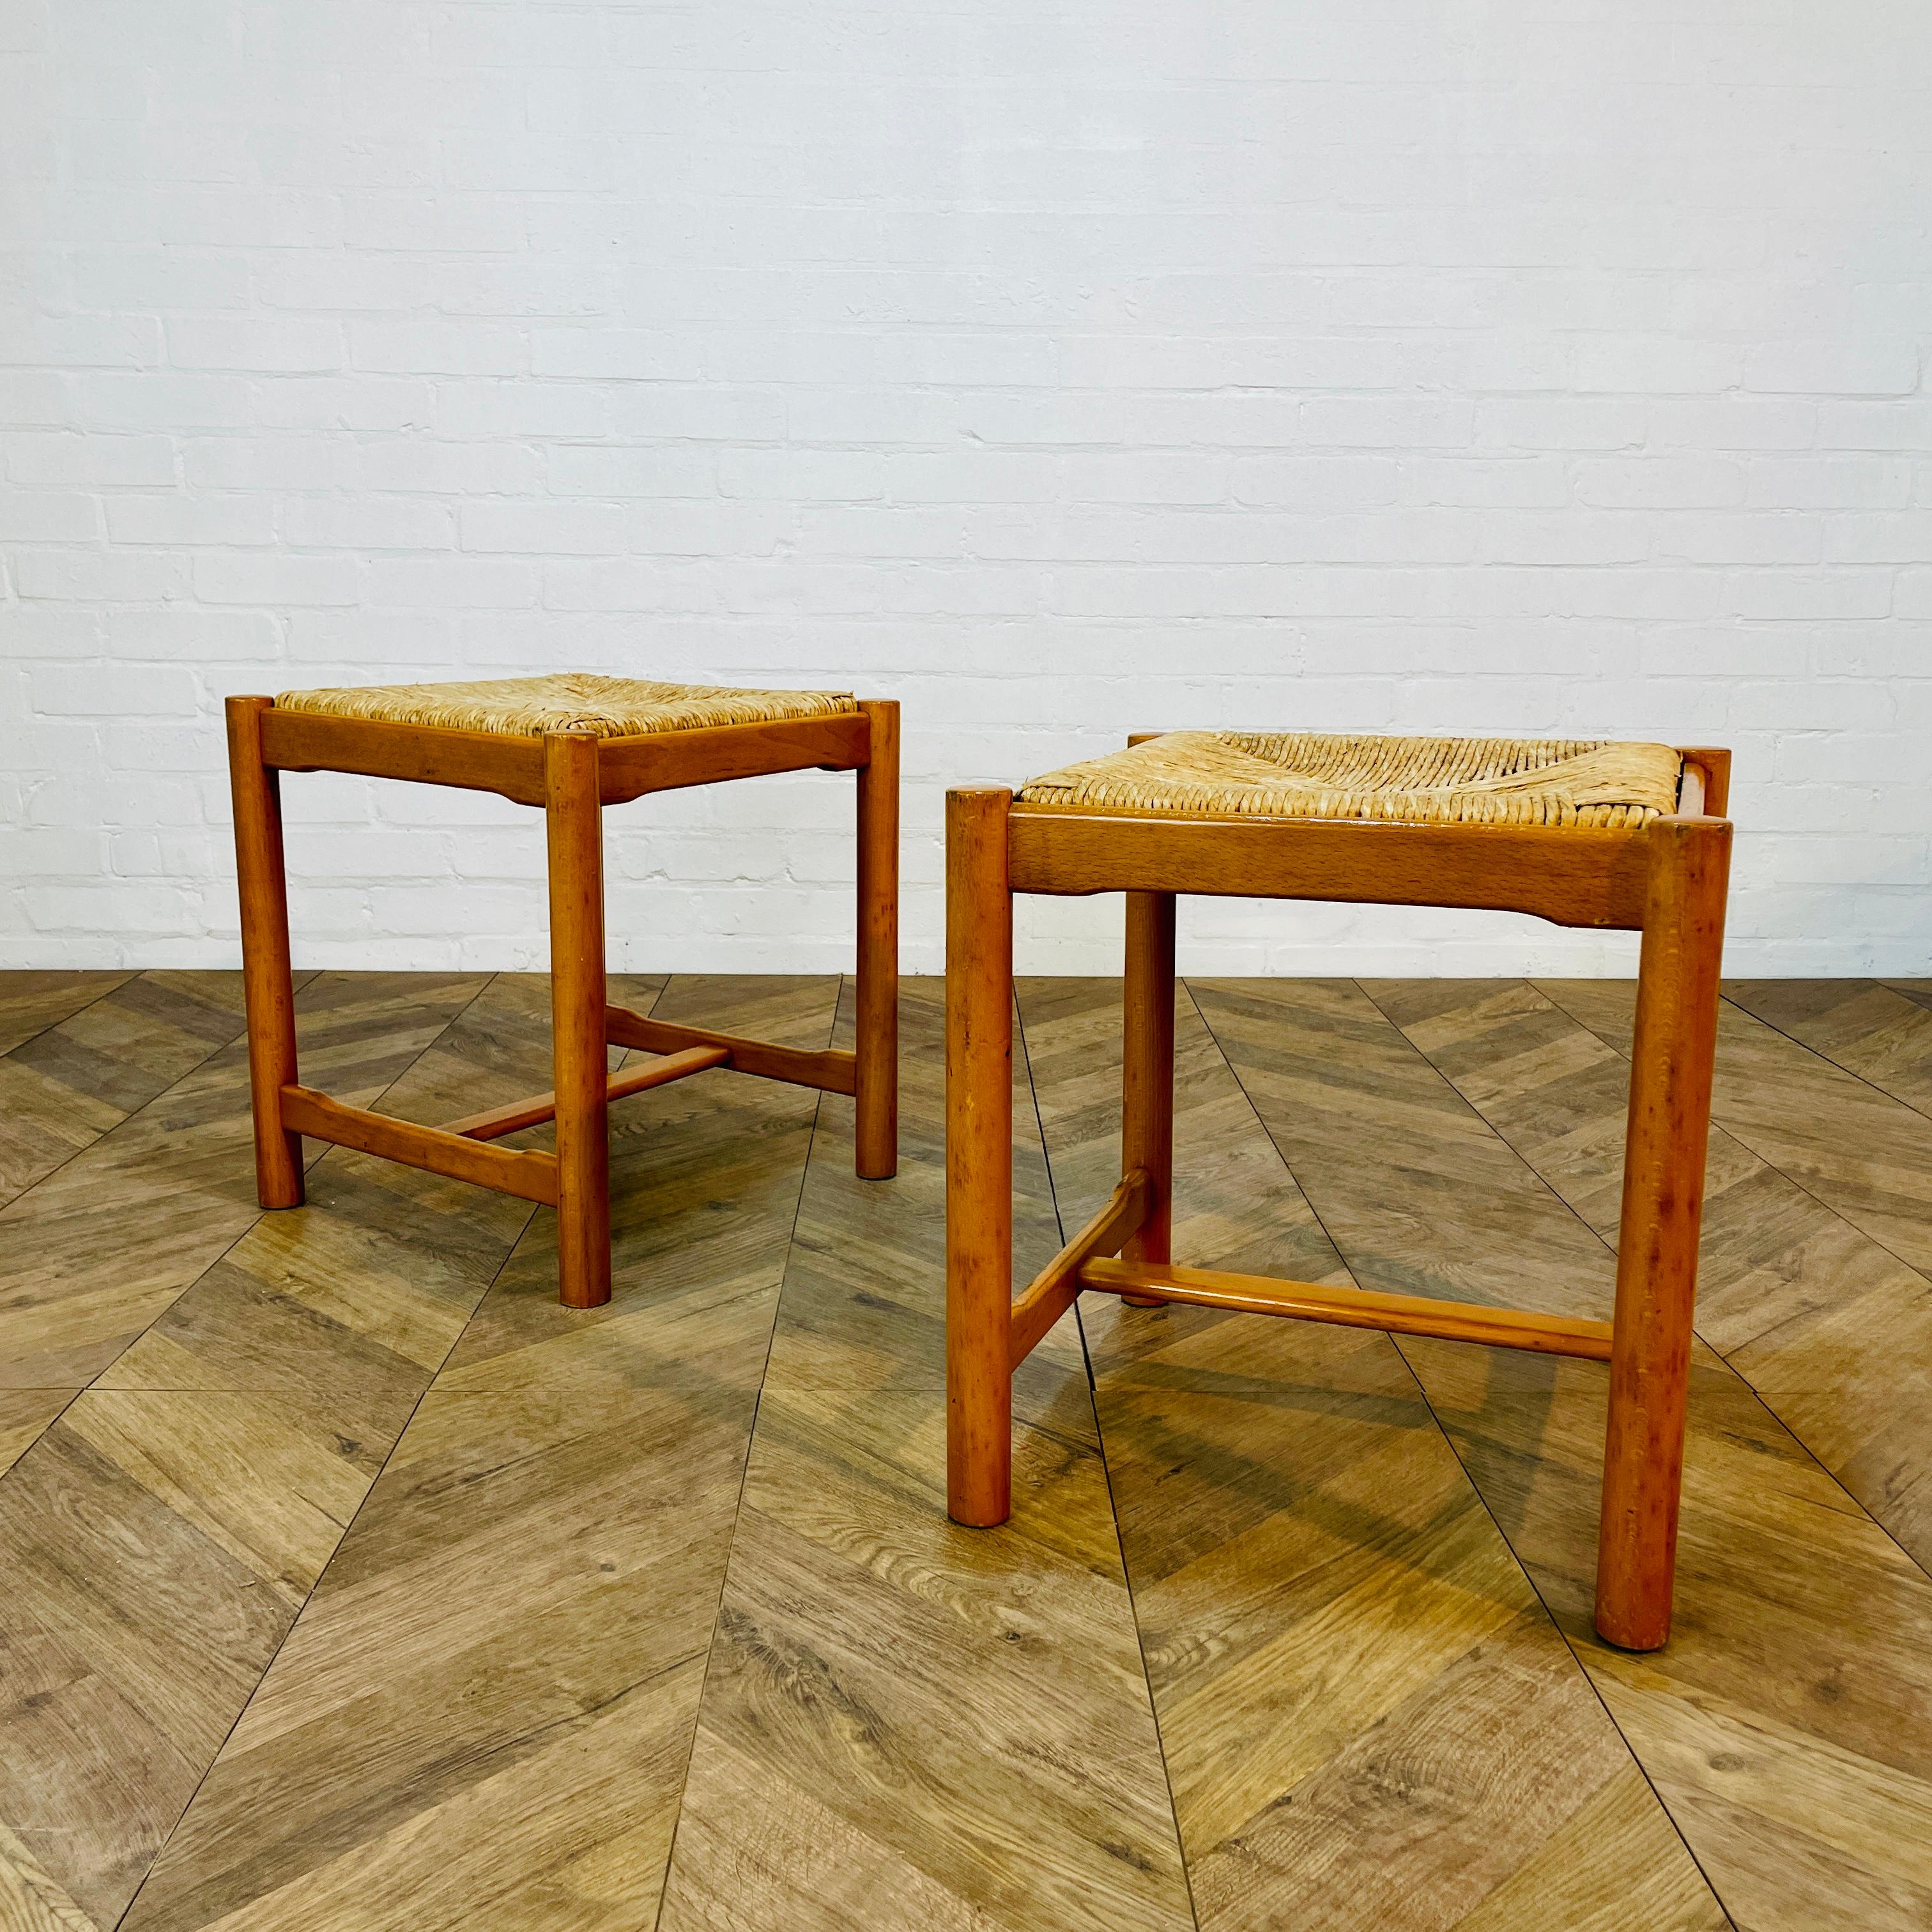 Papercord Vintage Mid Century Italian Stools, After Vico Magistretti, Set of 2, circa 1970 For Sale